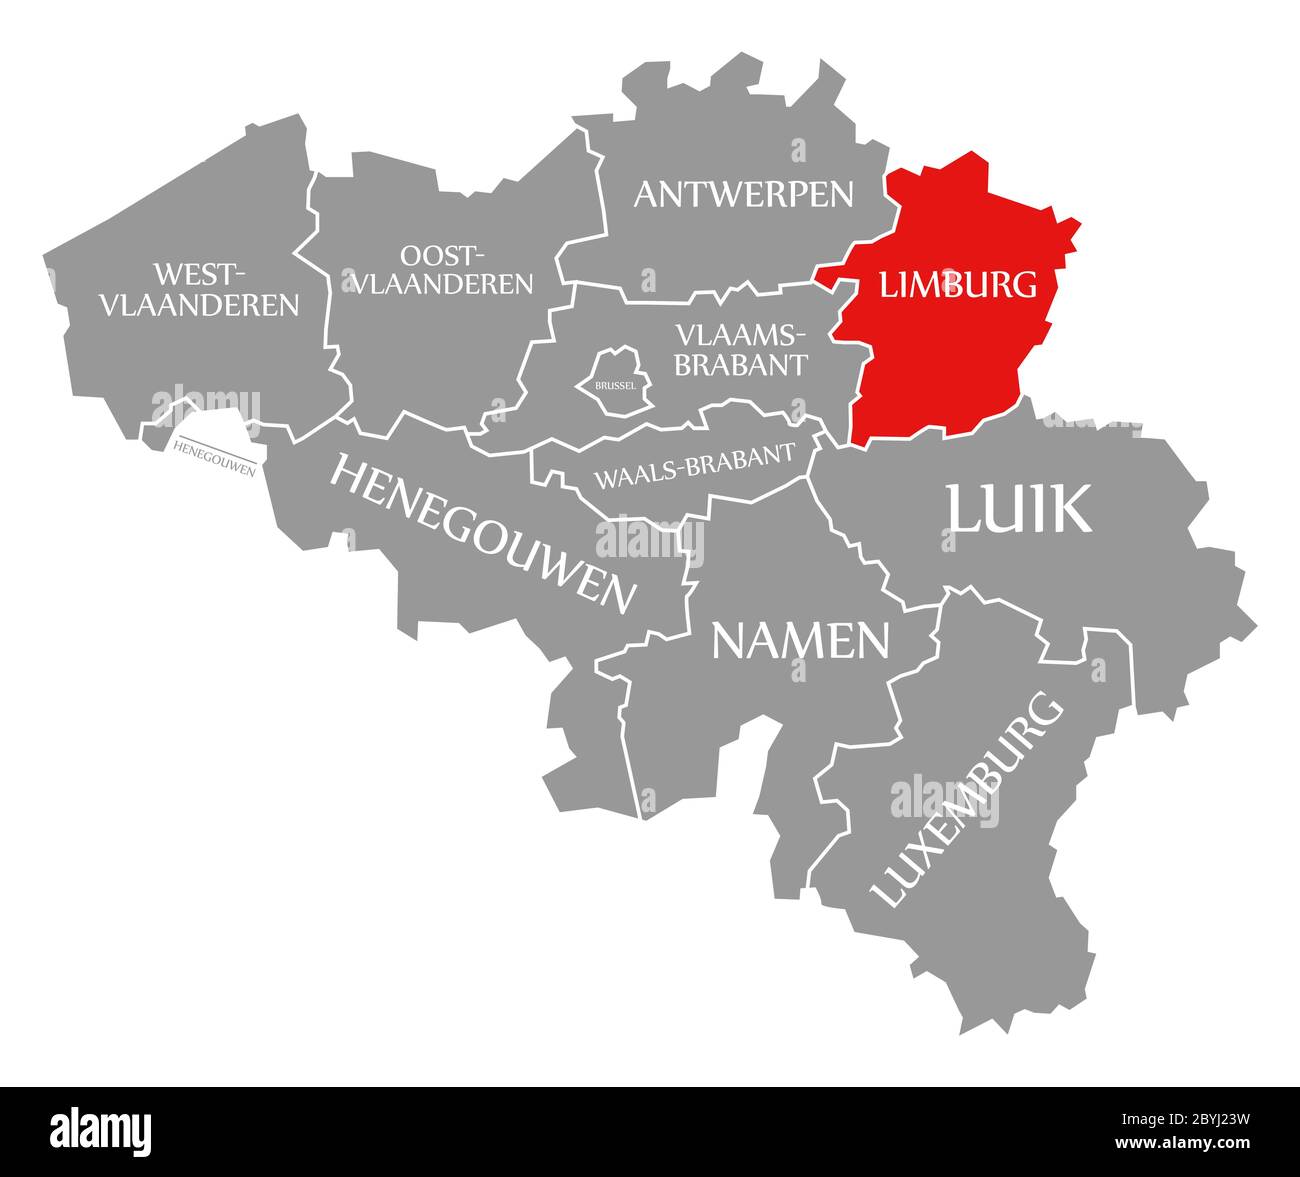 Limburg red highlighted in map of Belgium Stock Photo - Alamy